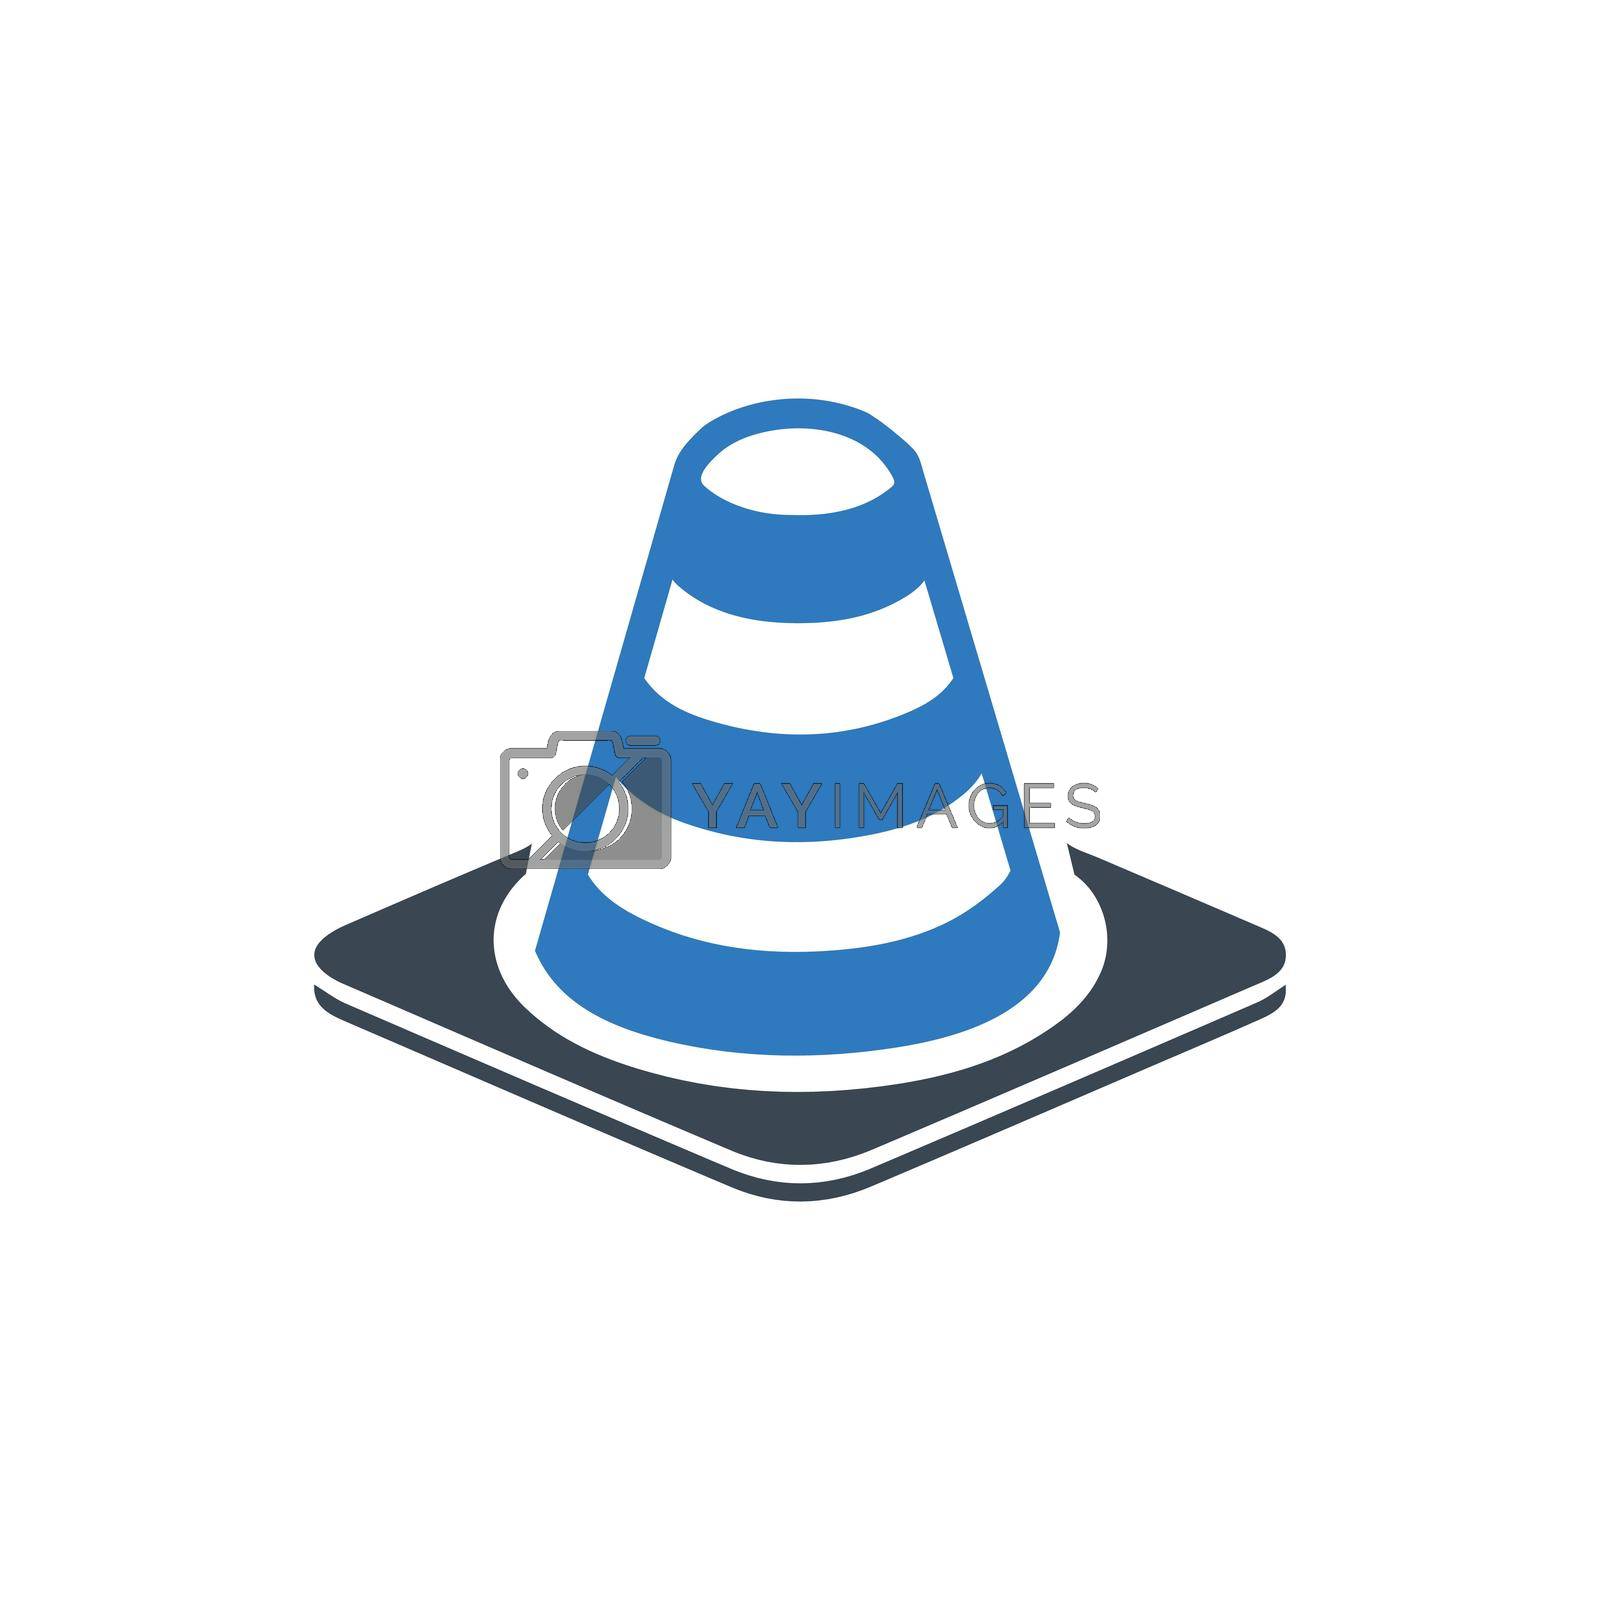 Royalty free image of Traffic Cone Icon by delwar018